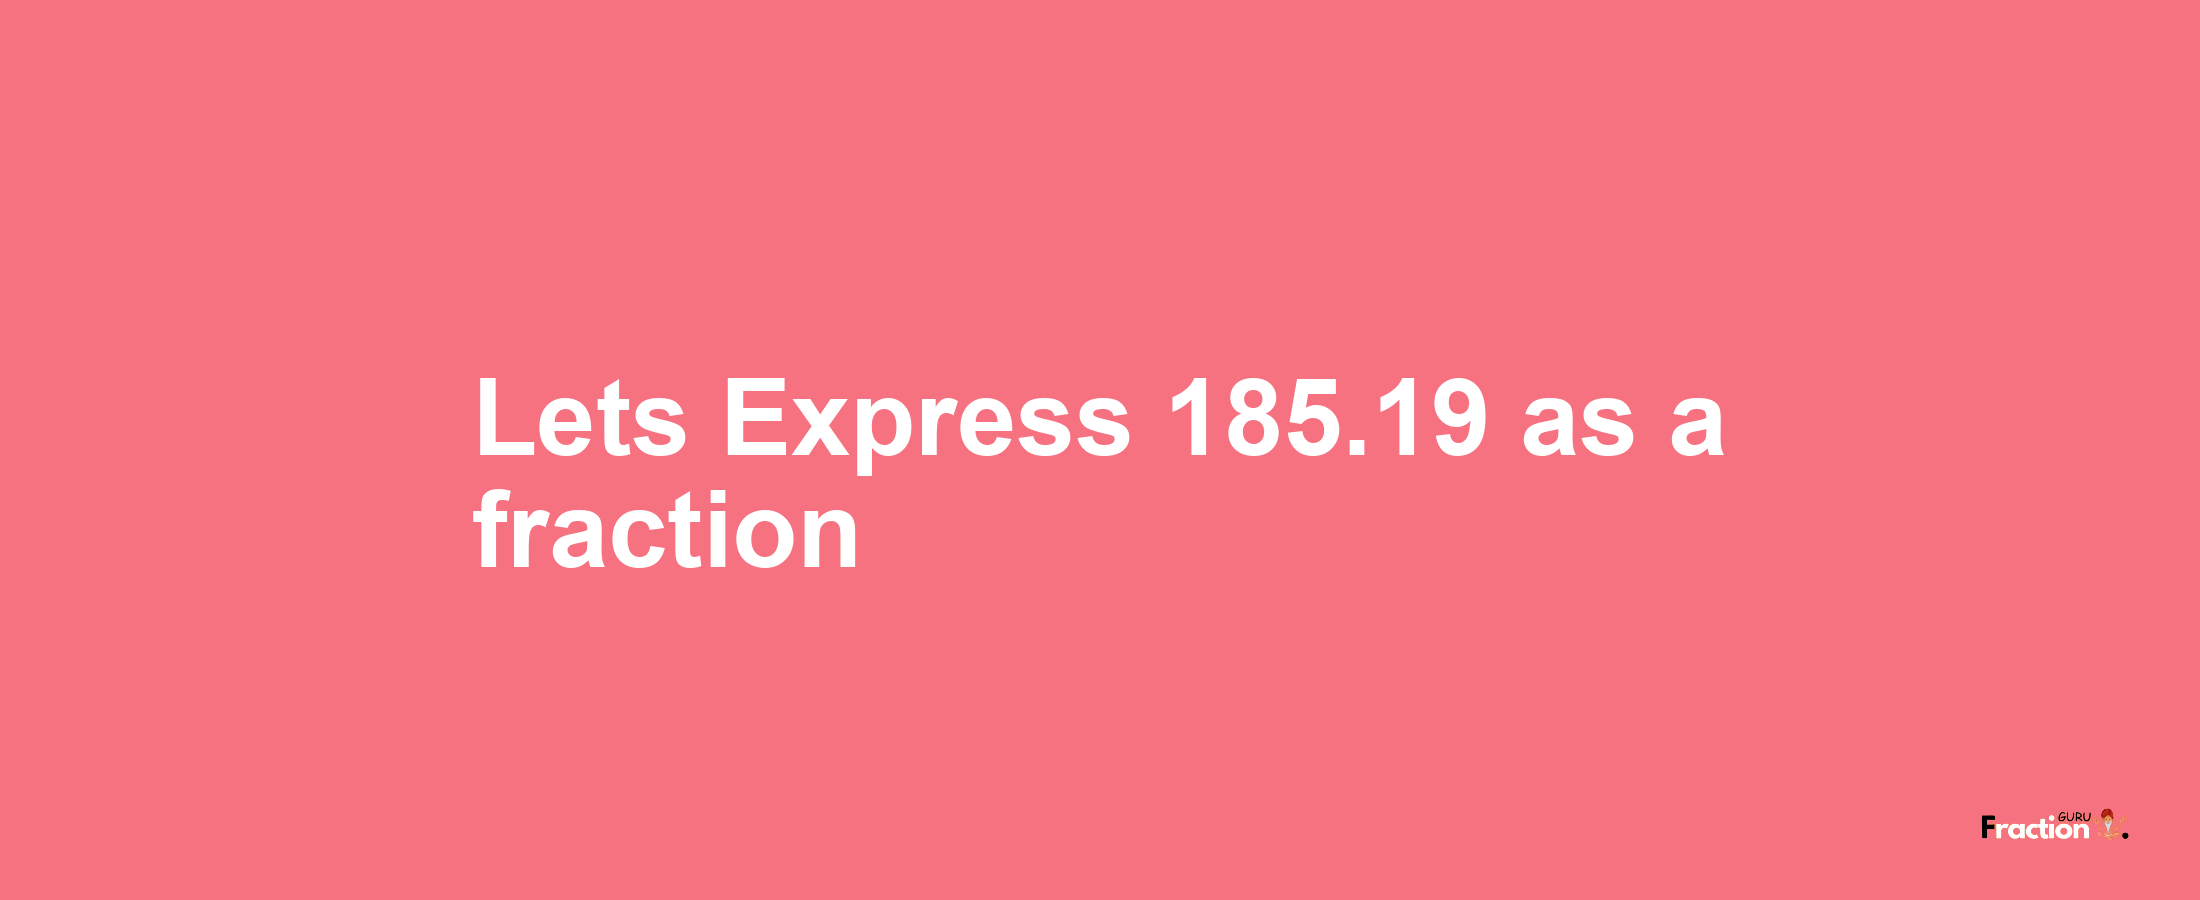 Lets Express 185.19 as afraction